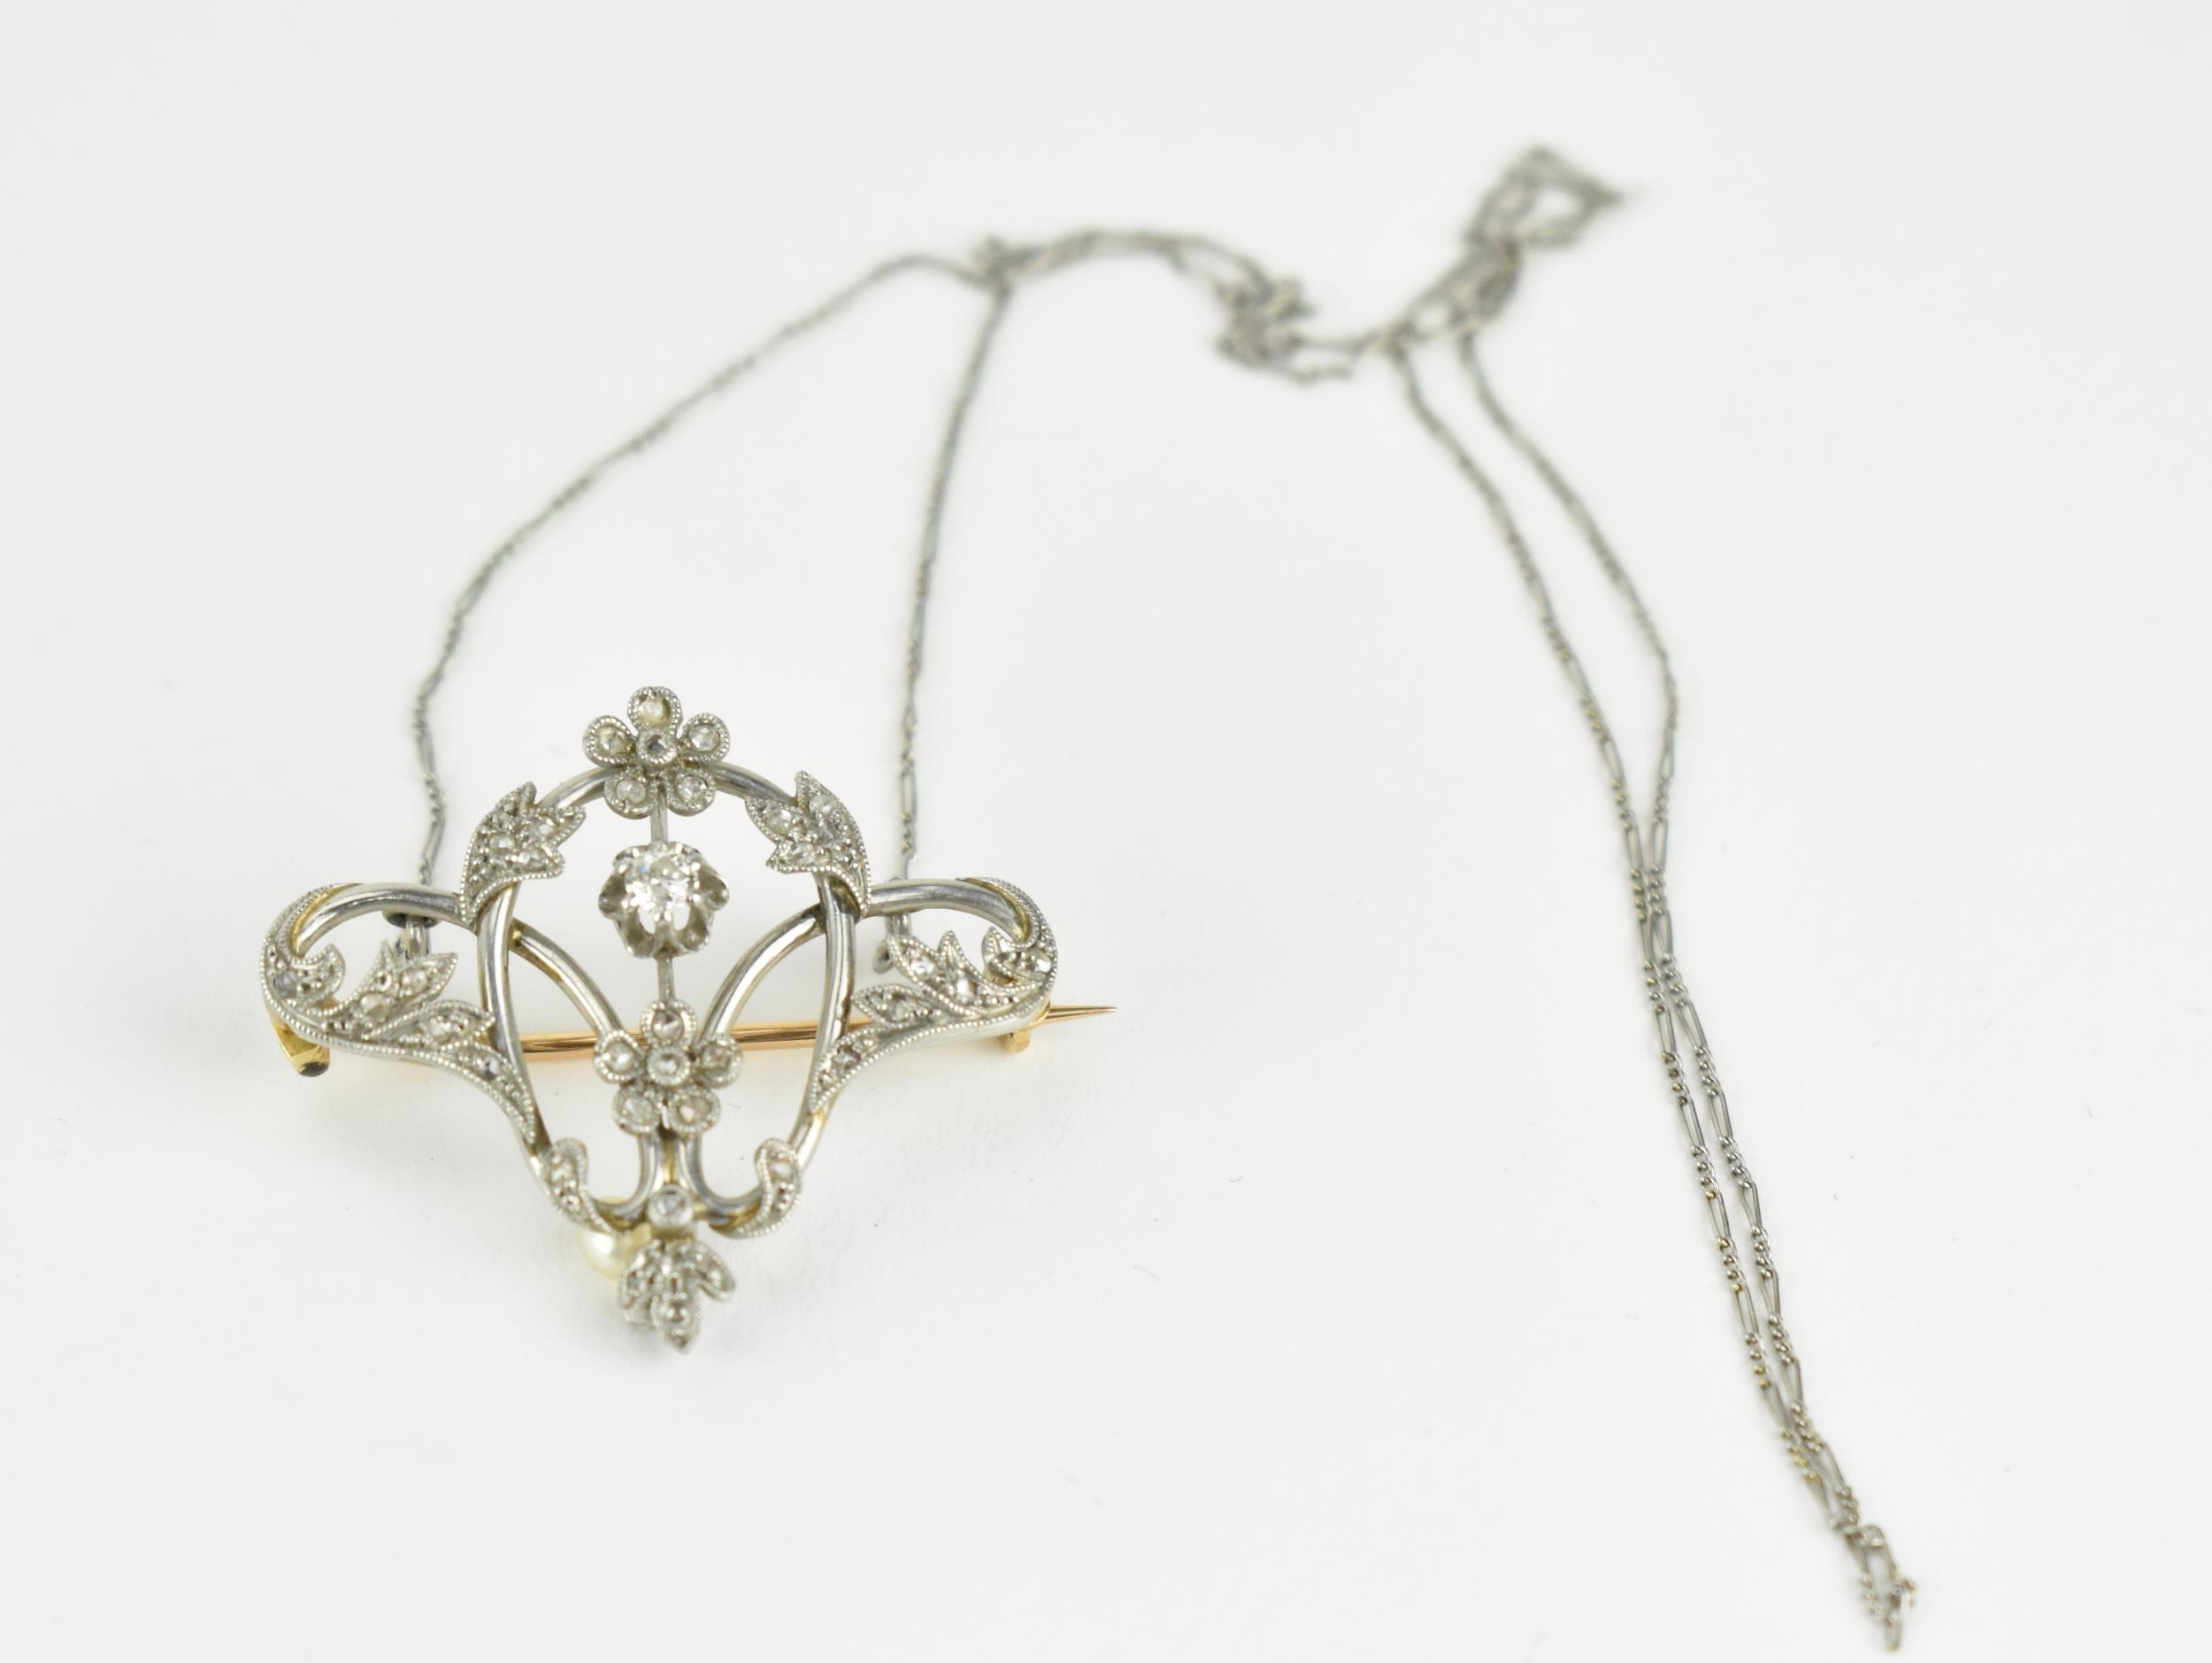 An Art Nouveau white and yellow gold wire framed brooch, fashioned as flowers and scrolled